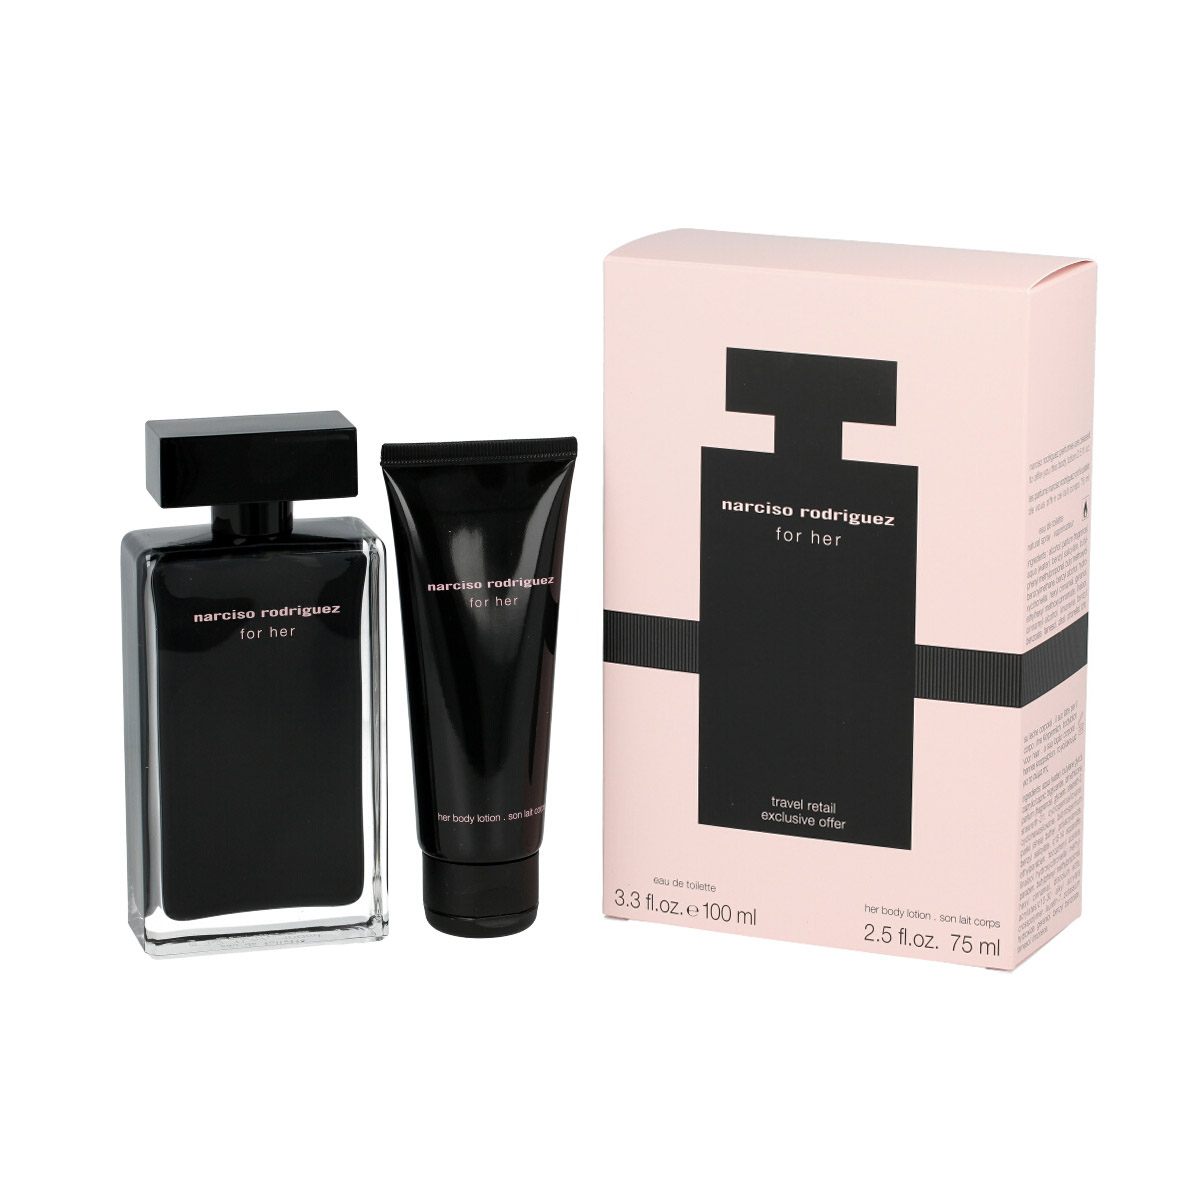 Narciso Rodriguez For Her 1St. Narciso Rodriguez For Her EDT 100 ml + BL 75 ml (woman) kvepalų mėginukas Moterims Rinkinys